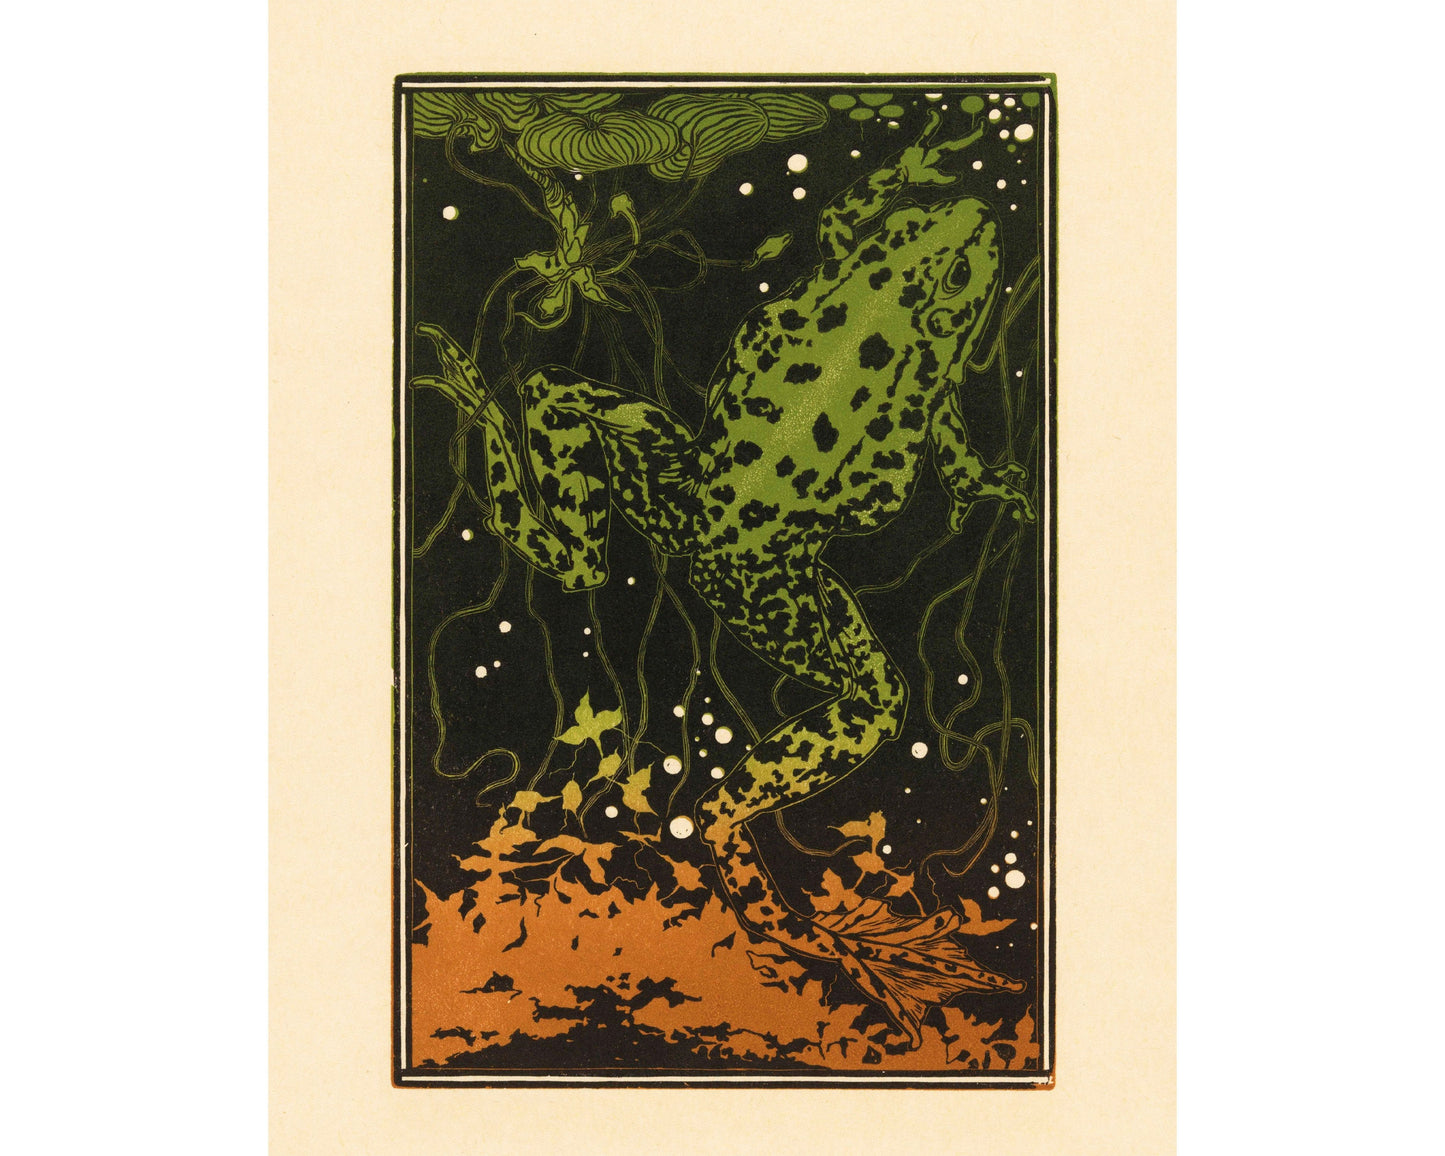 Vintage leopard frog fine art print | Swimming toad wall art | Julie de Graag color woodcut | Animal and Nature art | Eco-friendly